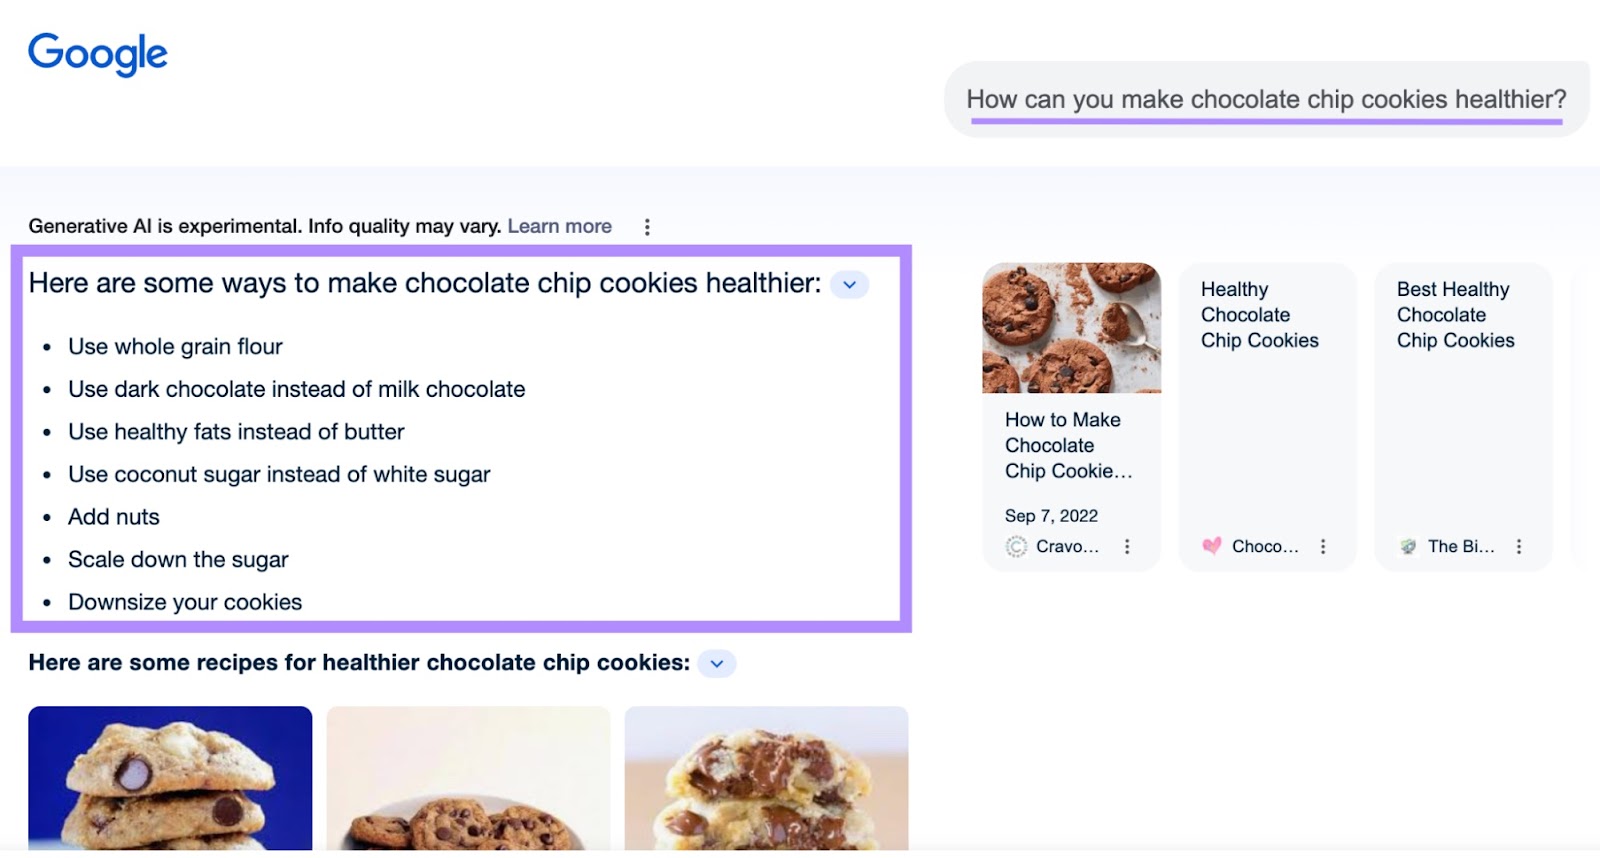 Google SGE for follow-up question "How can you make chocolate chip cookies healthier?"